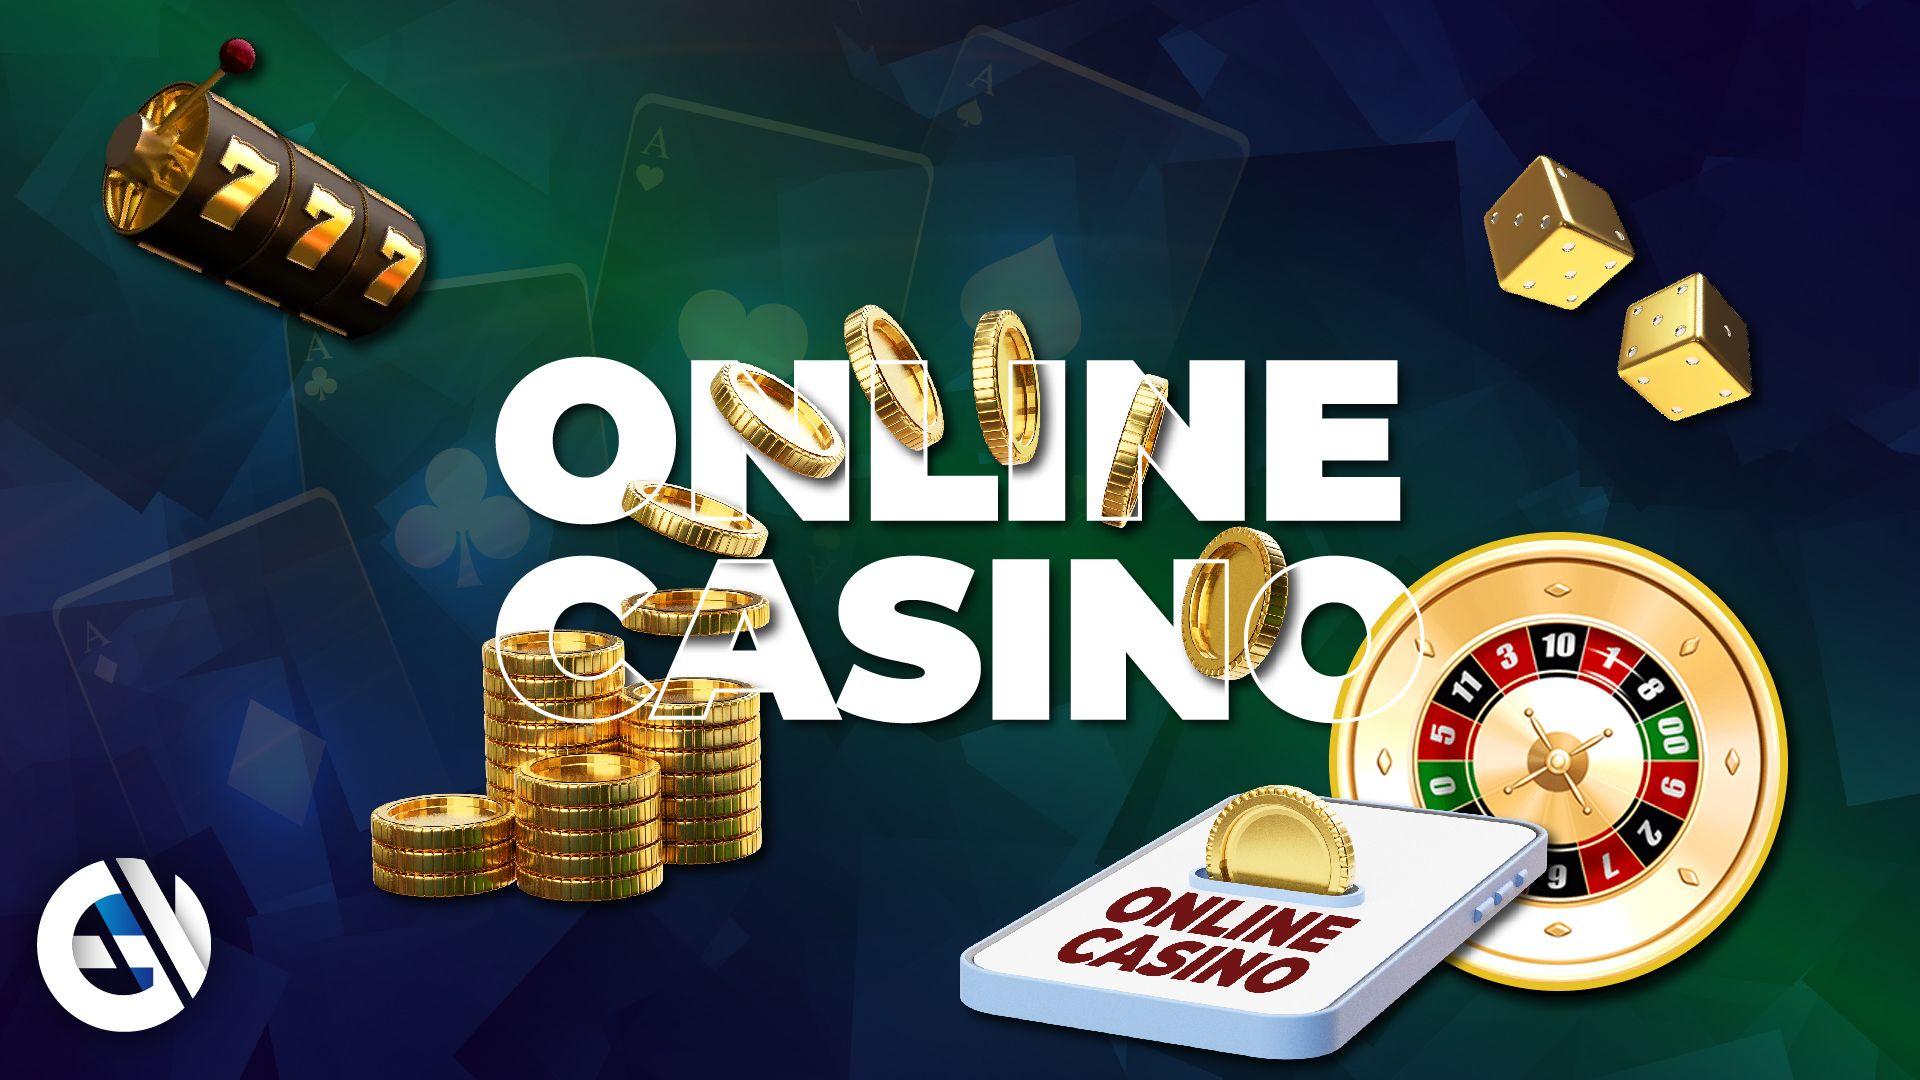 The best slots for high roller players at Nomini Casino